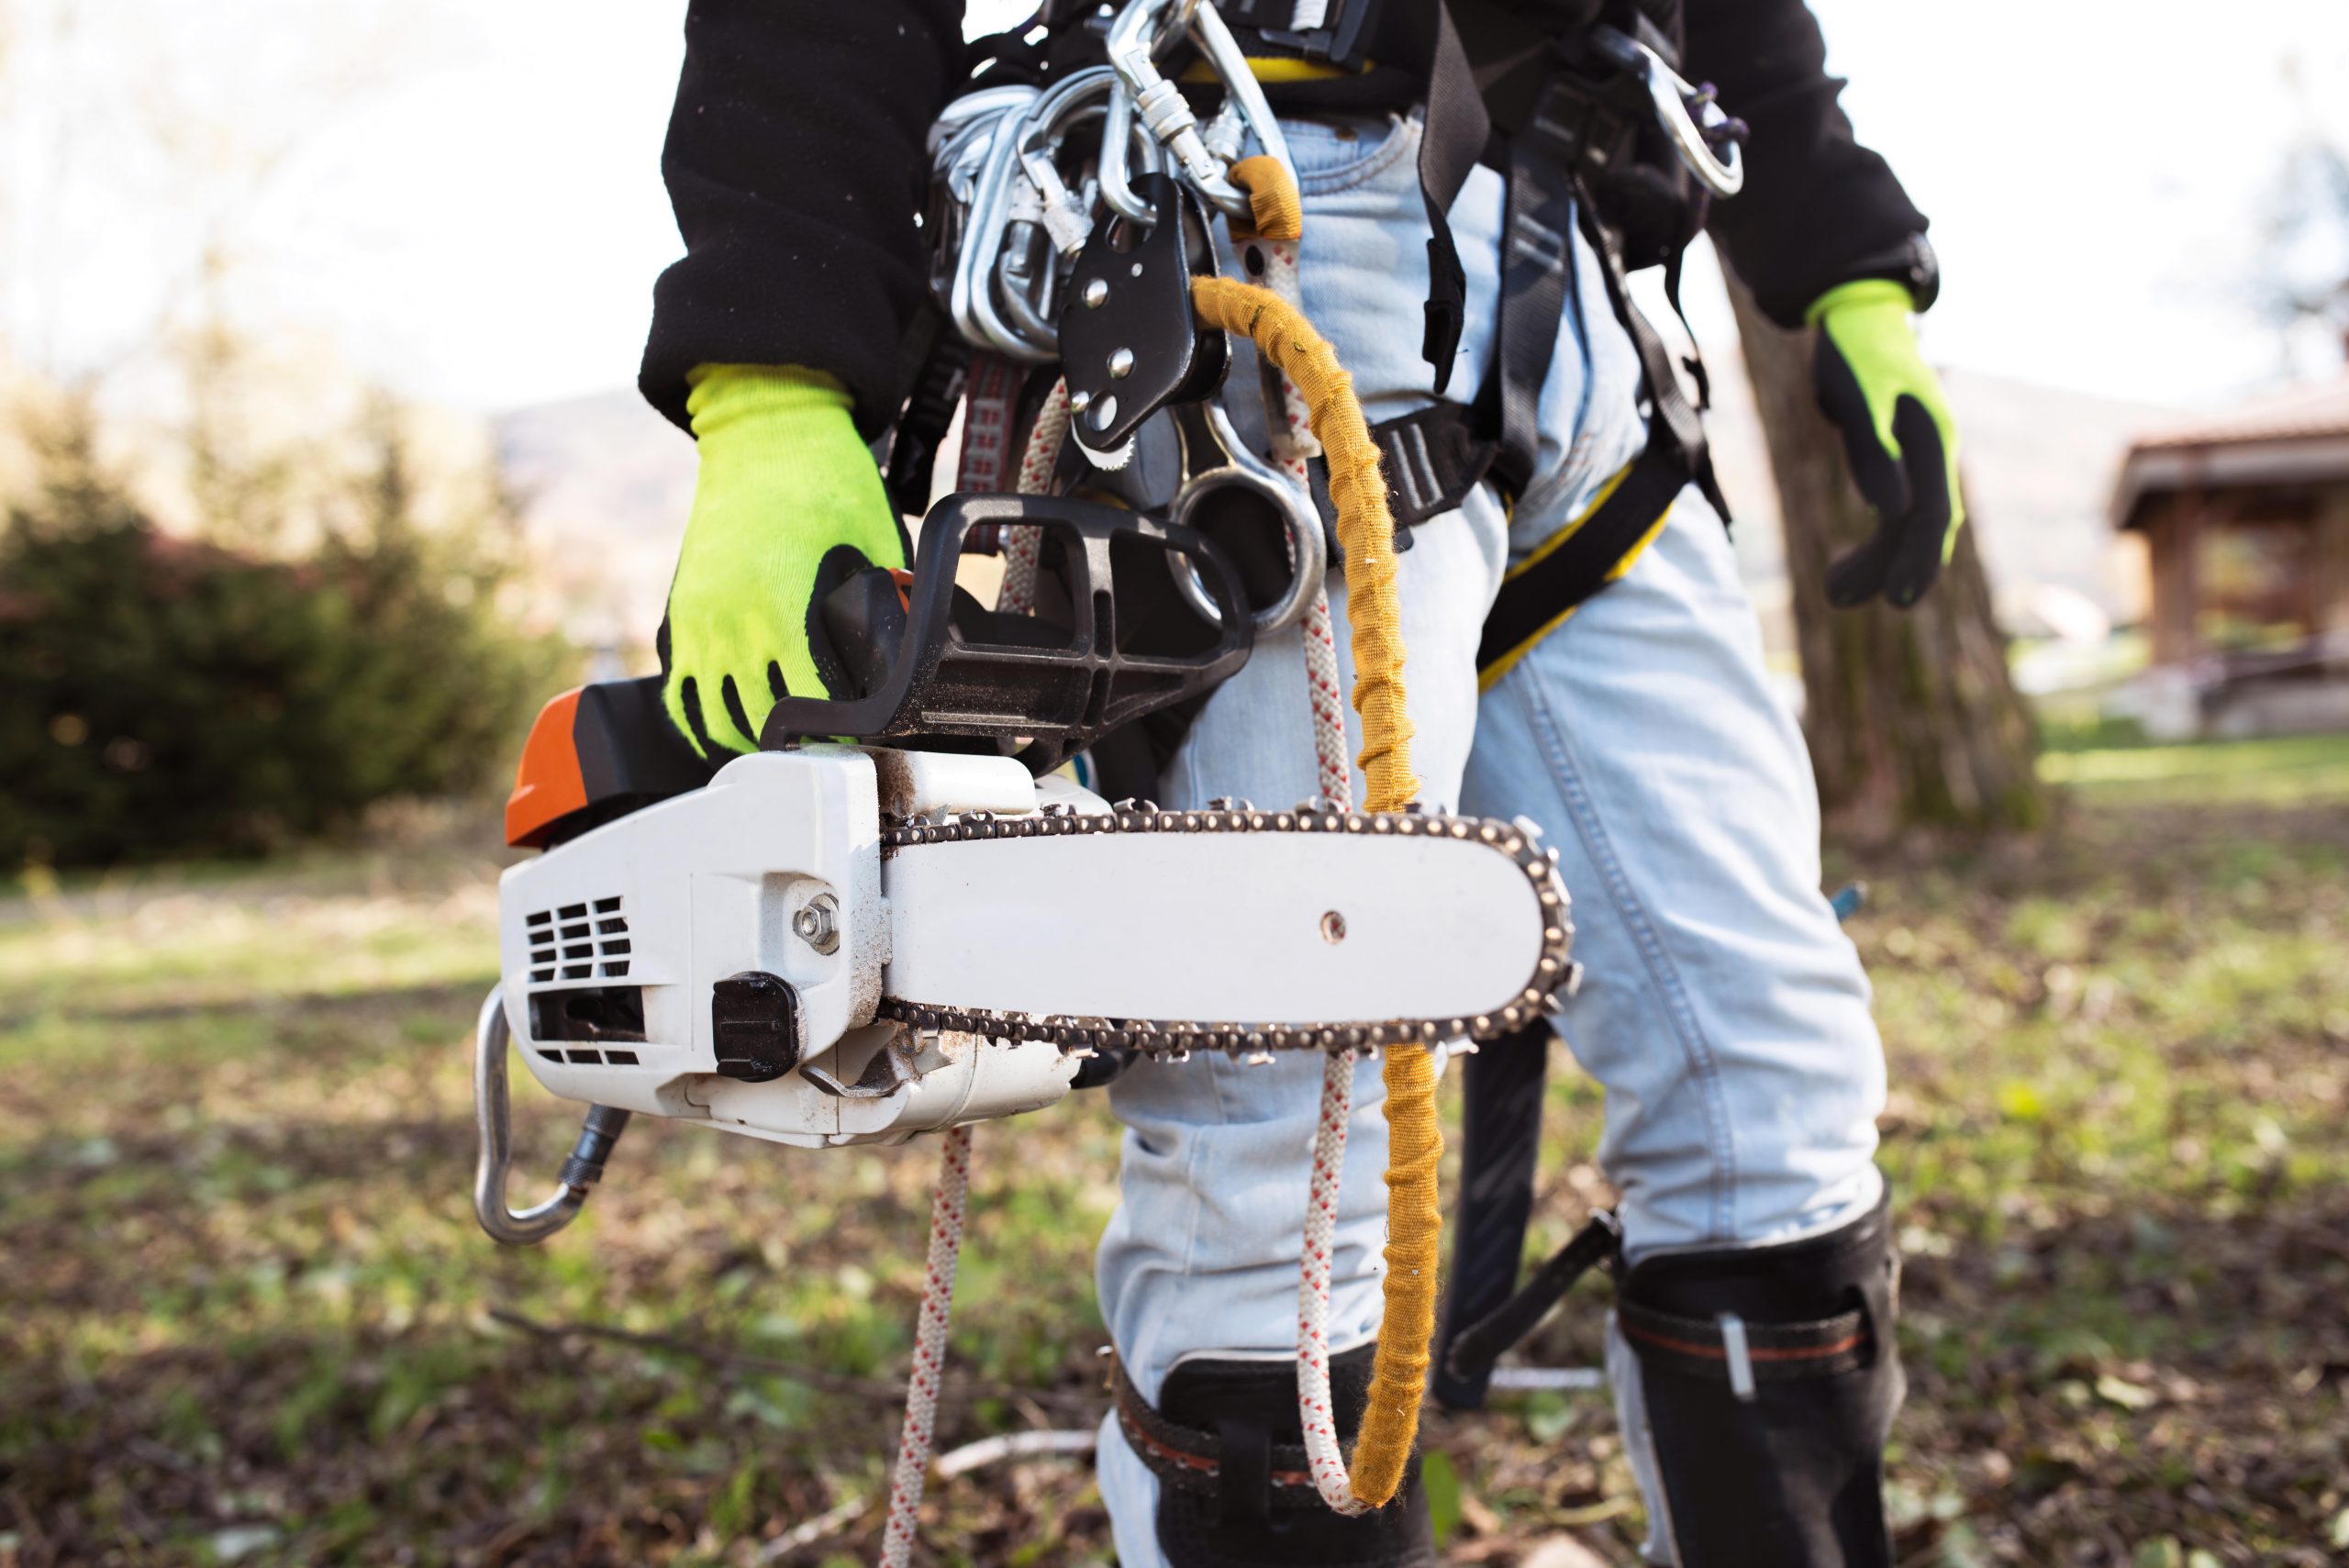 Tree service worker in blue jeans holding a chainsaw and wearing bright yellow protection gloves, strapped in tree climbing safety equipment.